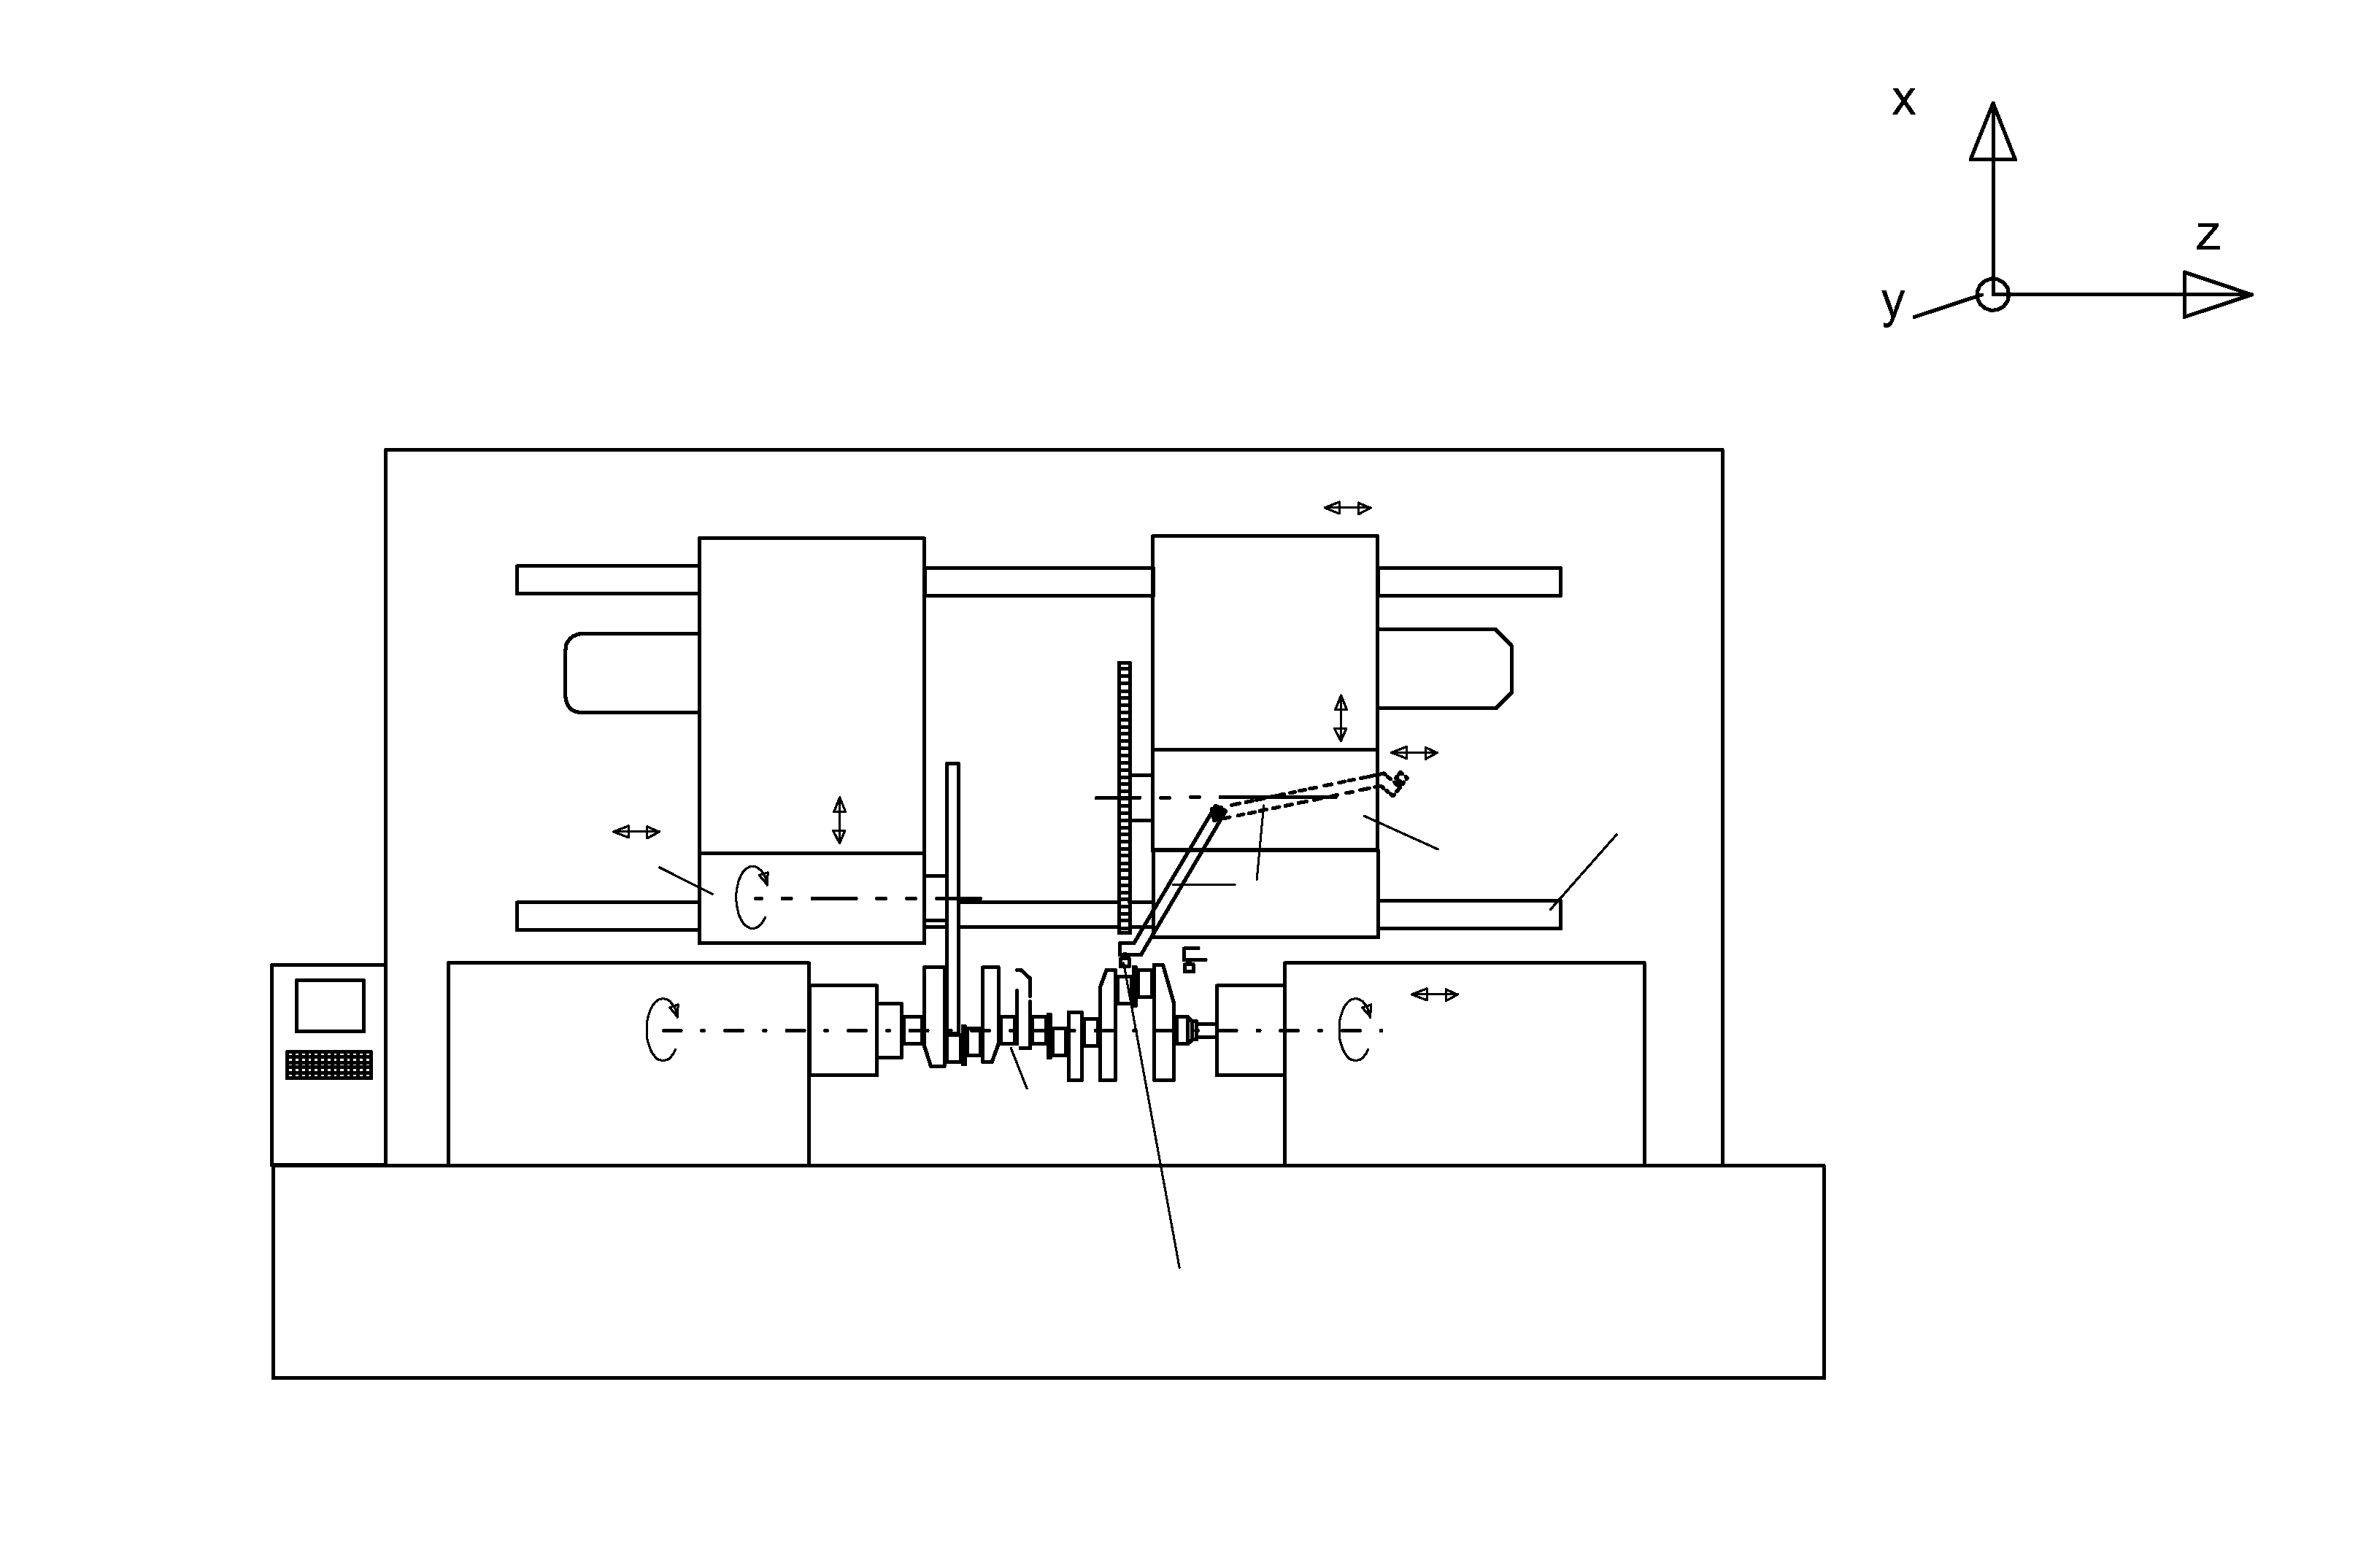 Method and device for finishing work pieces